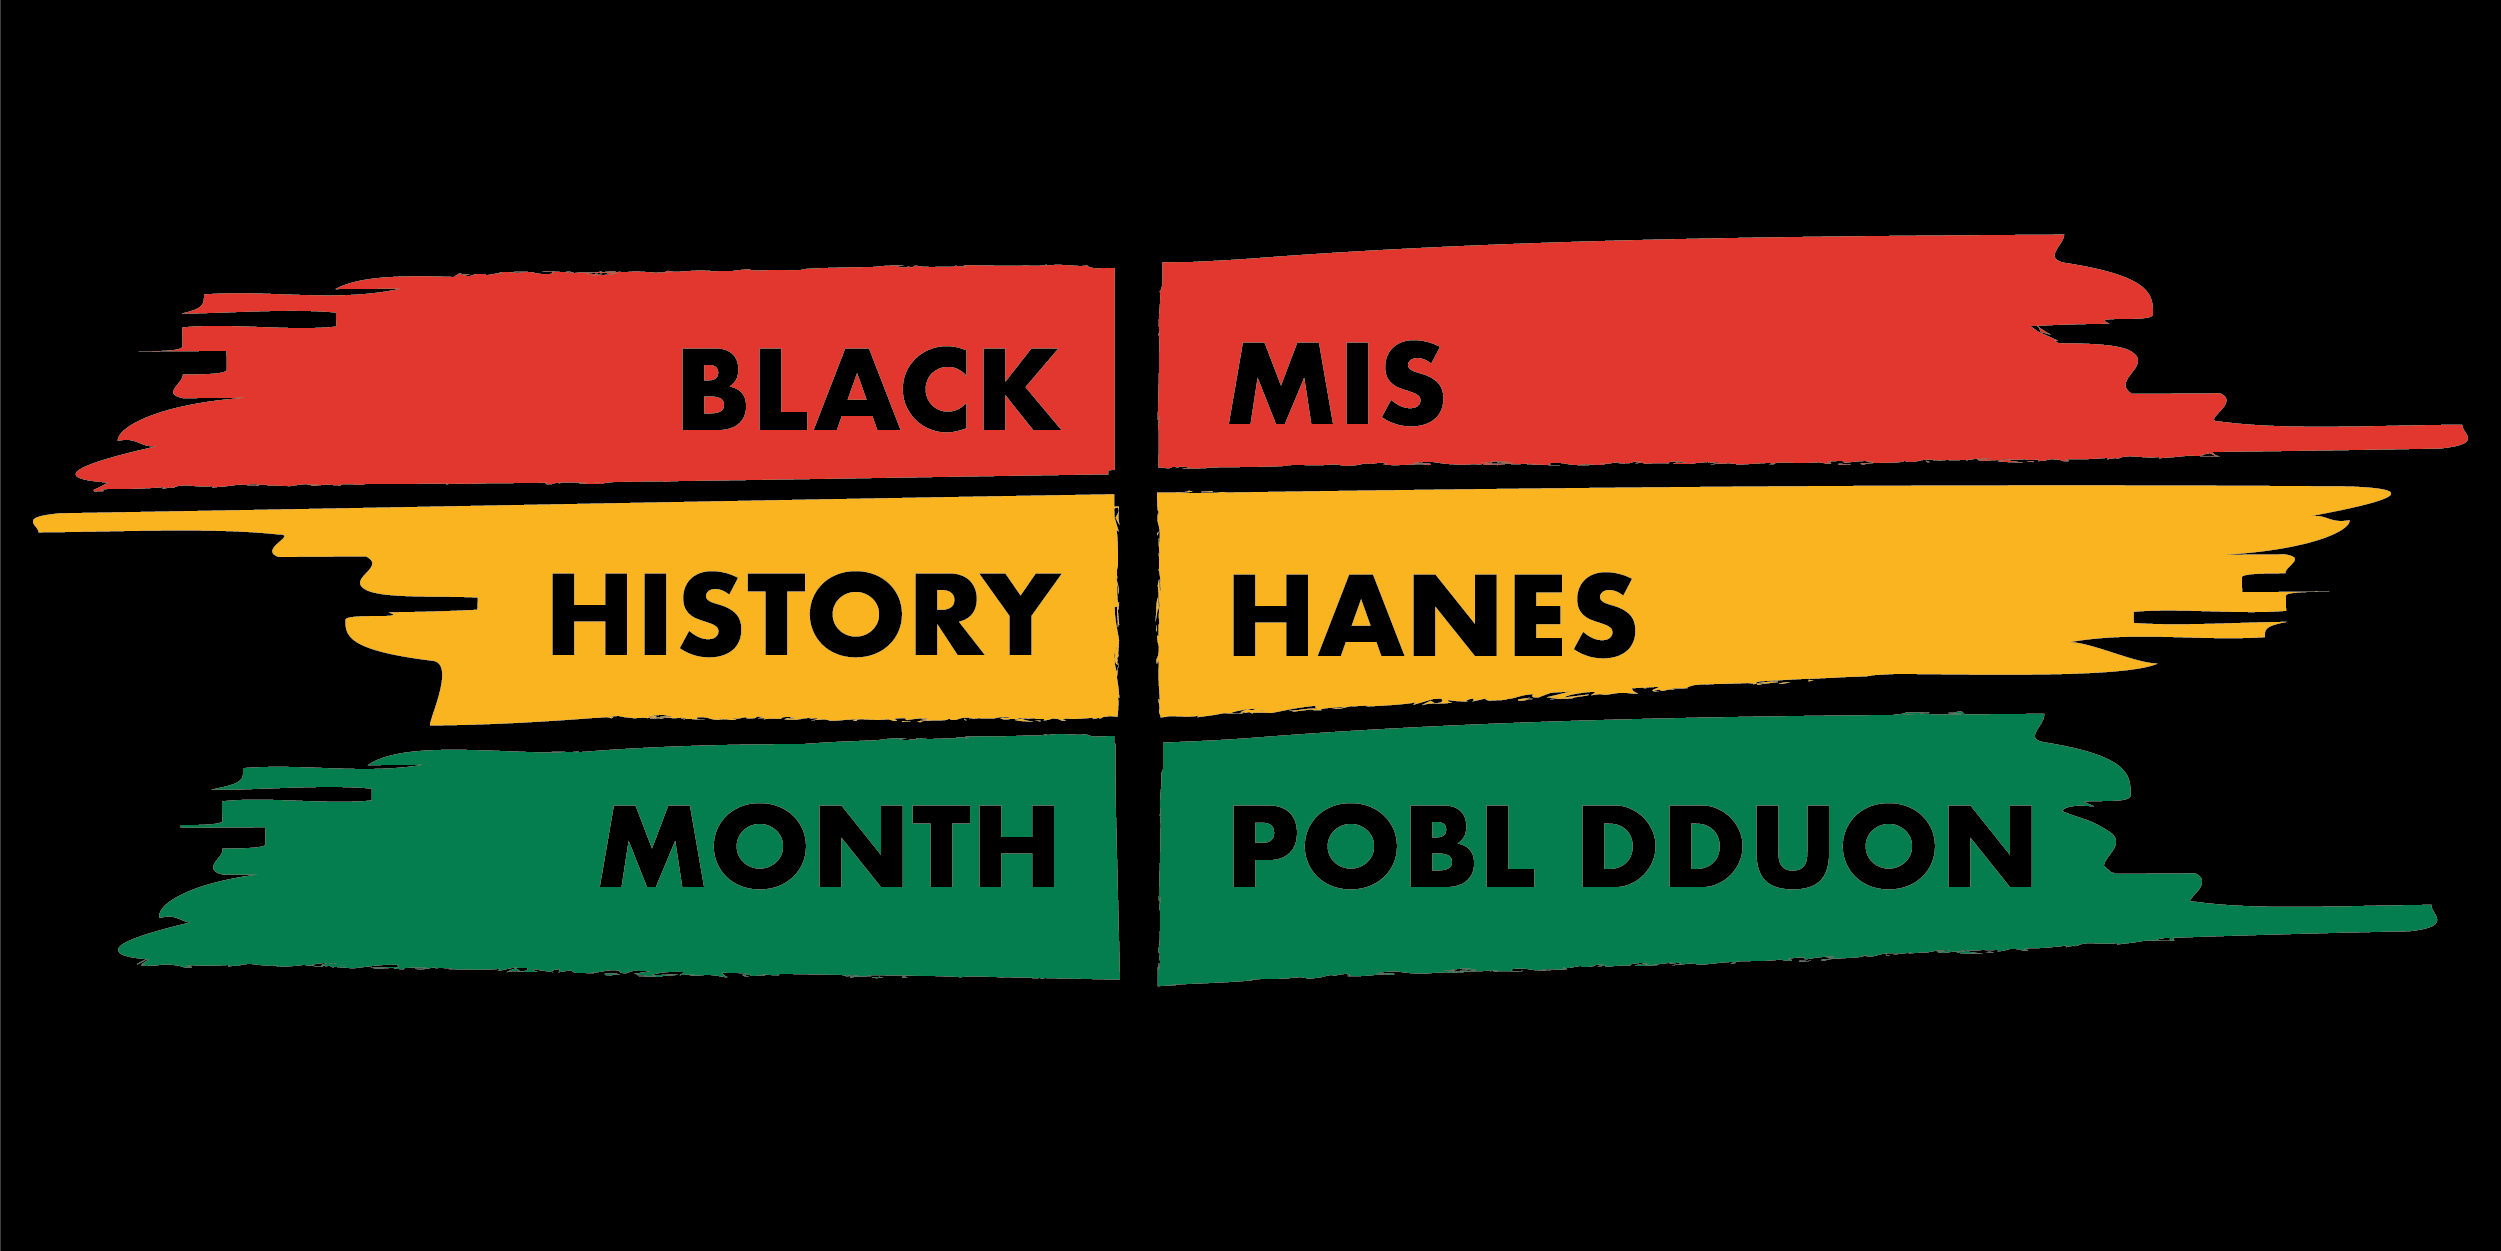 Bilingual Black History Month wording over a green, red and yellow background